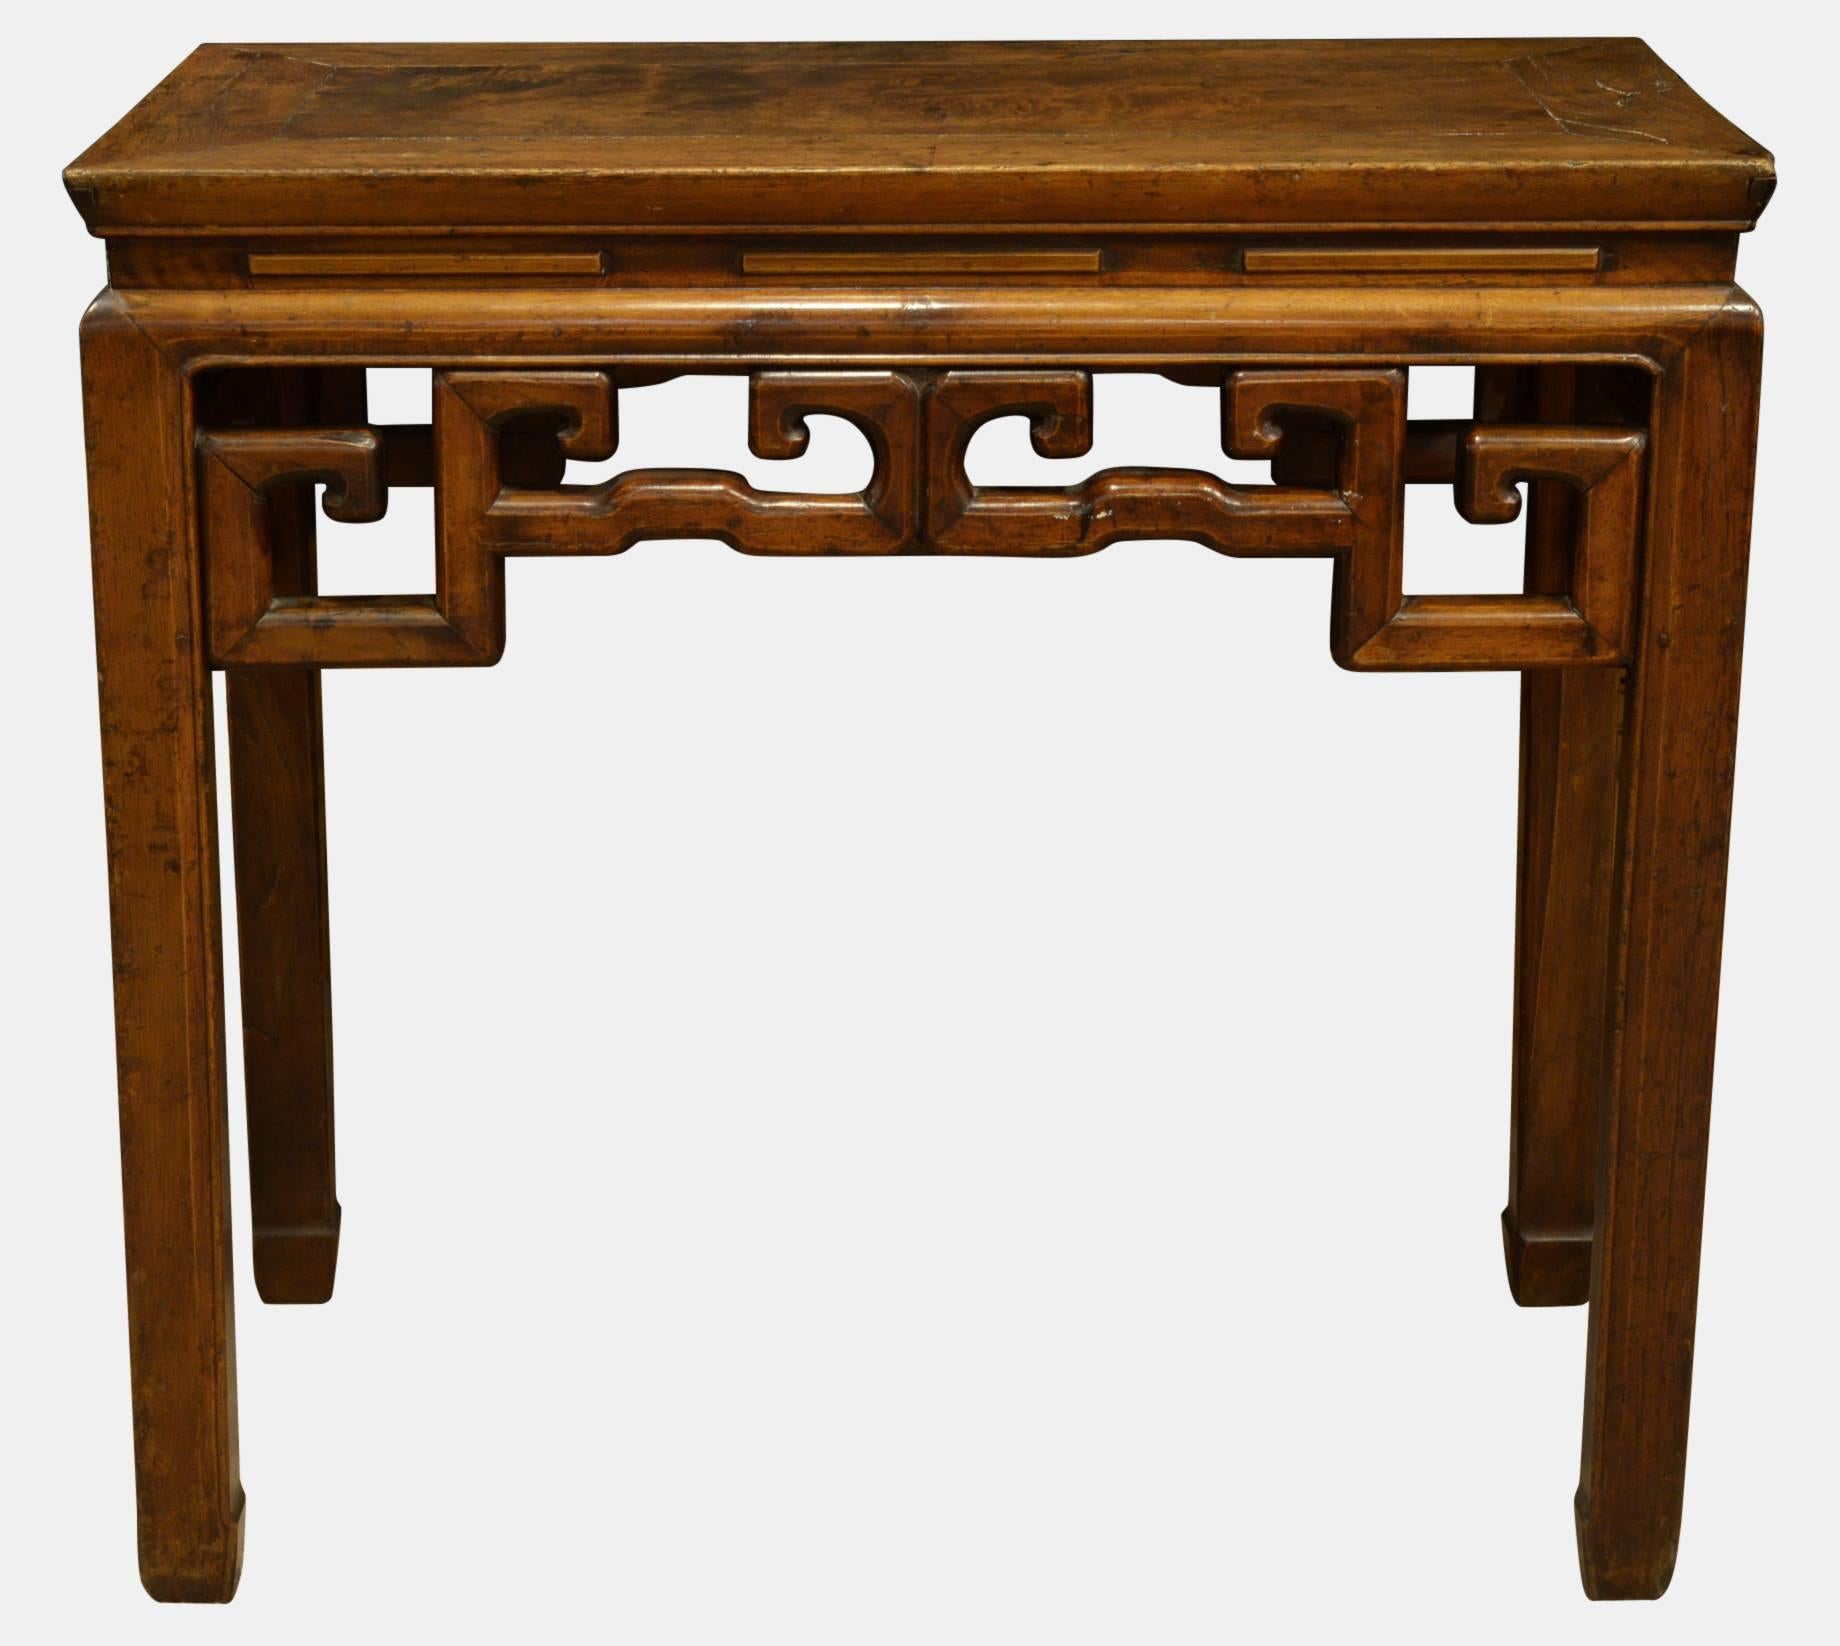 Late 19th century Chinese altar table with elm top.